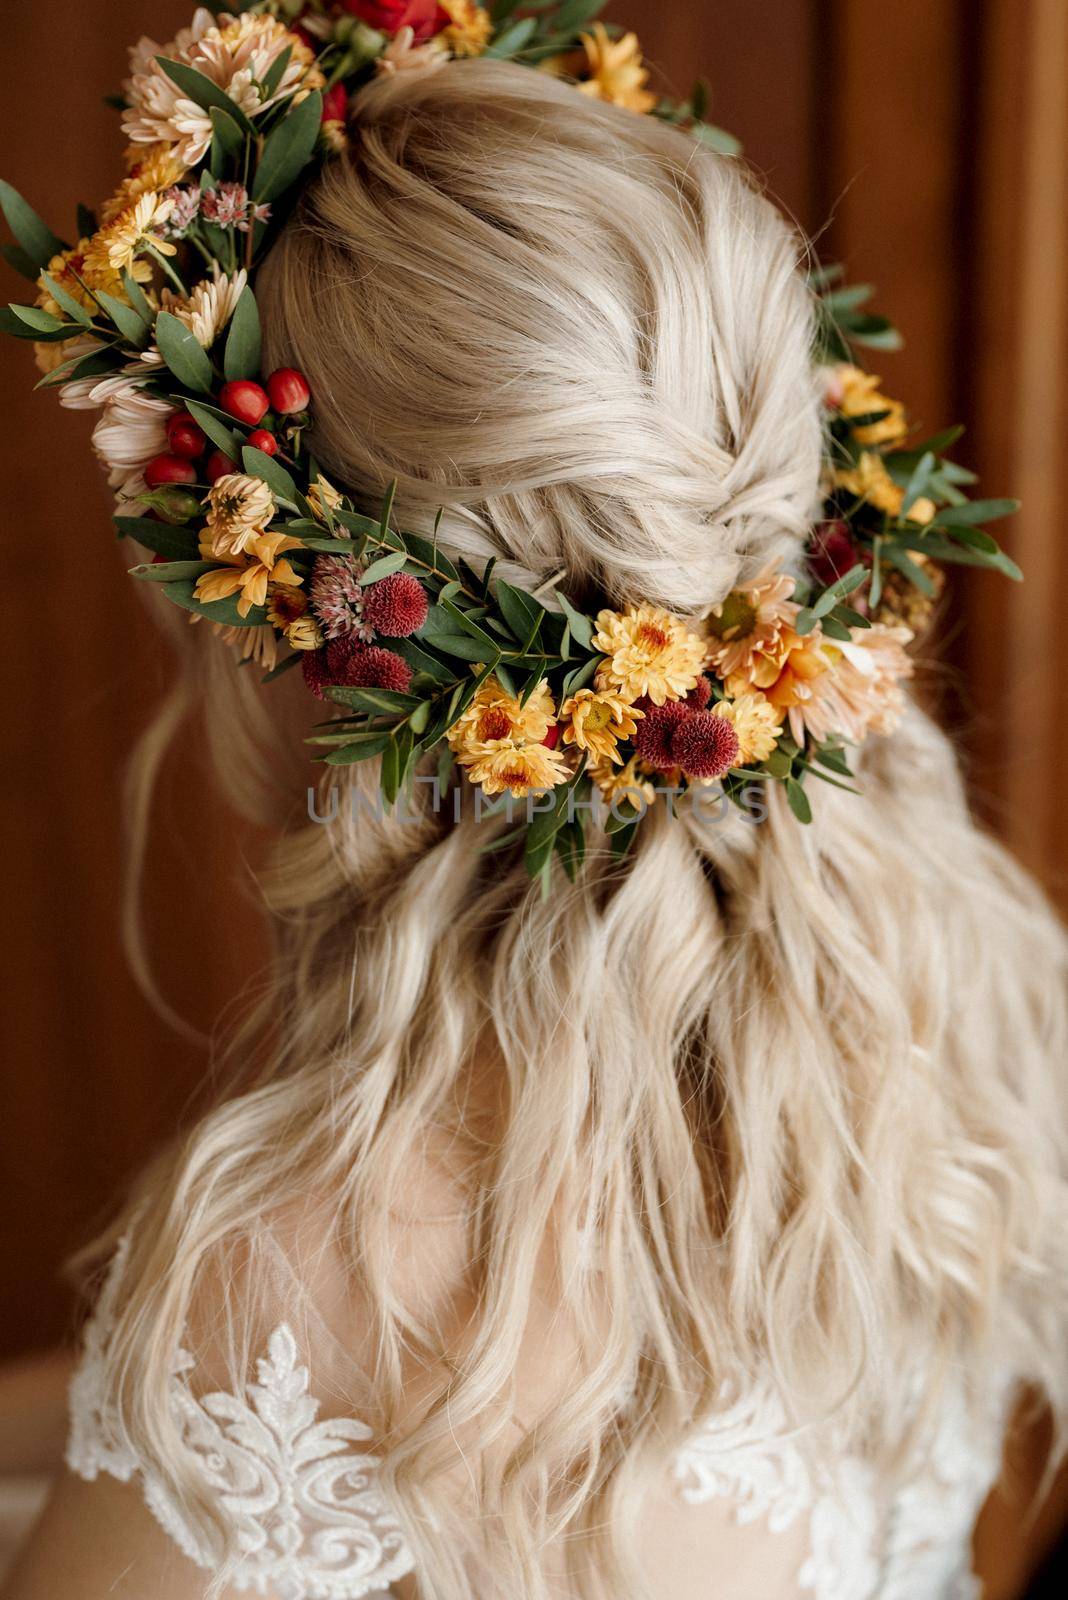 wedding wreath of dried flowers on the head of a bride with white hair